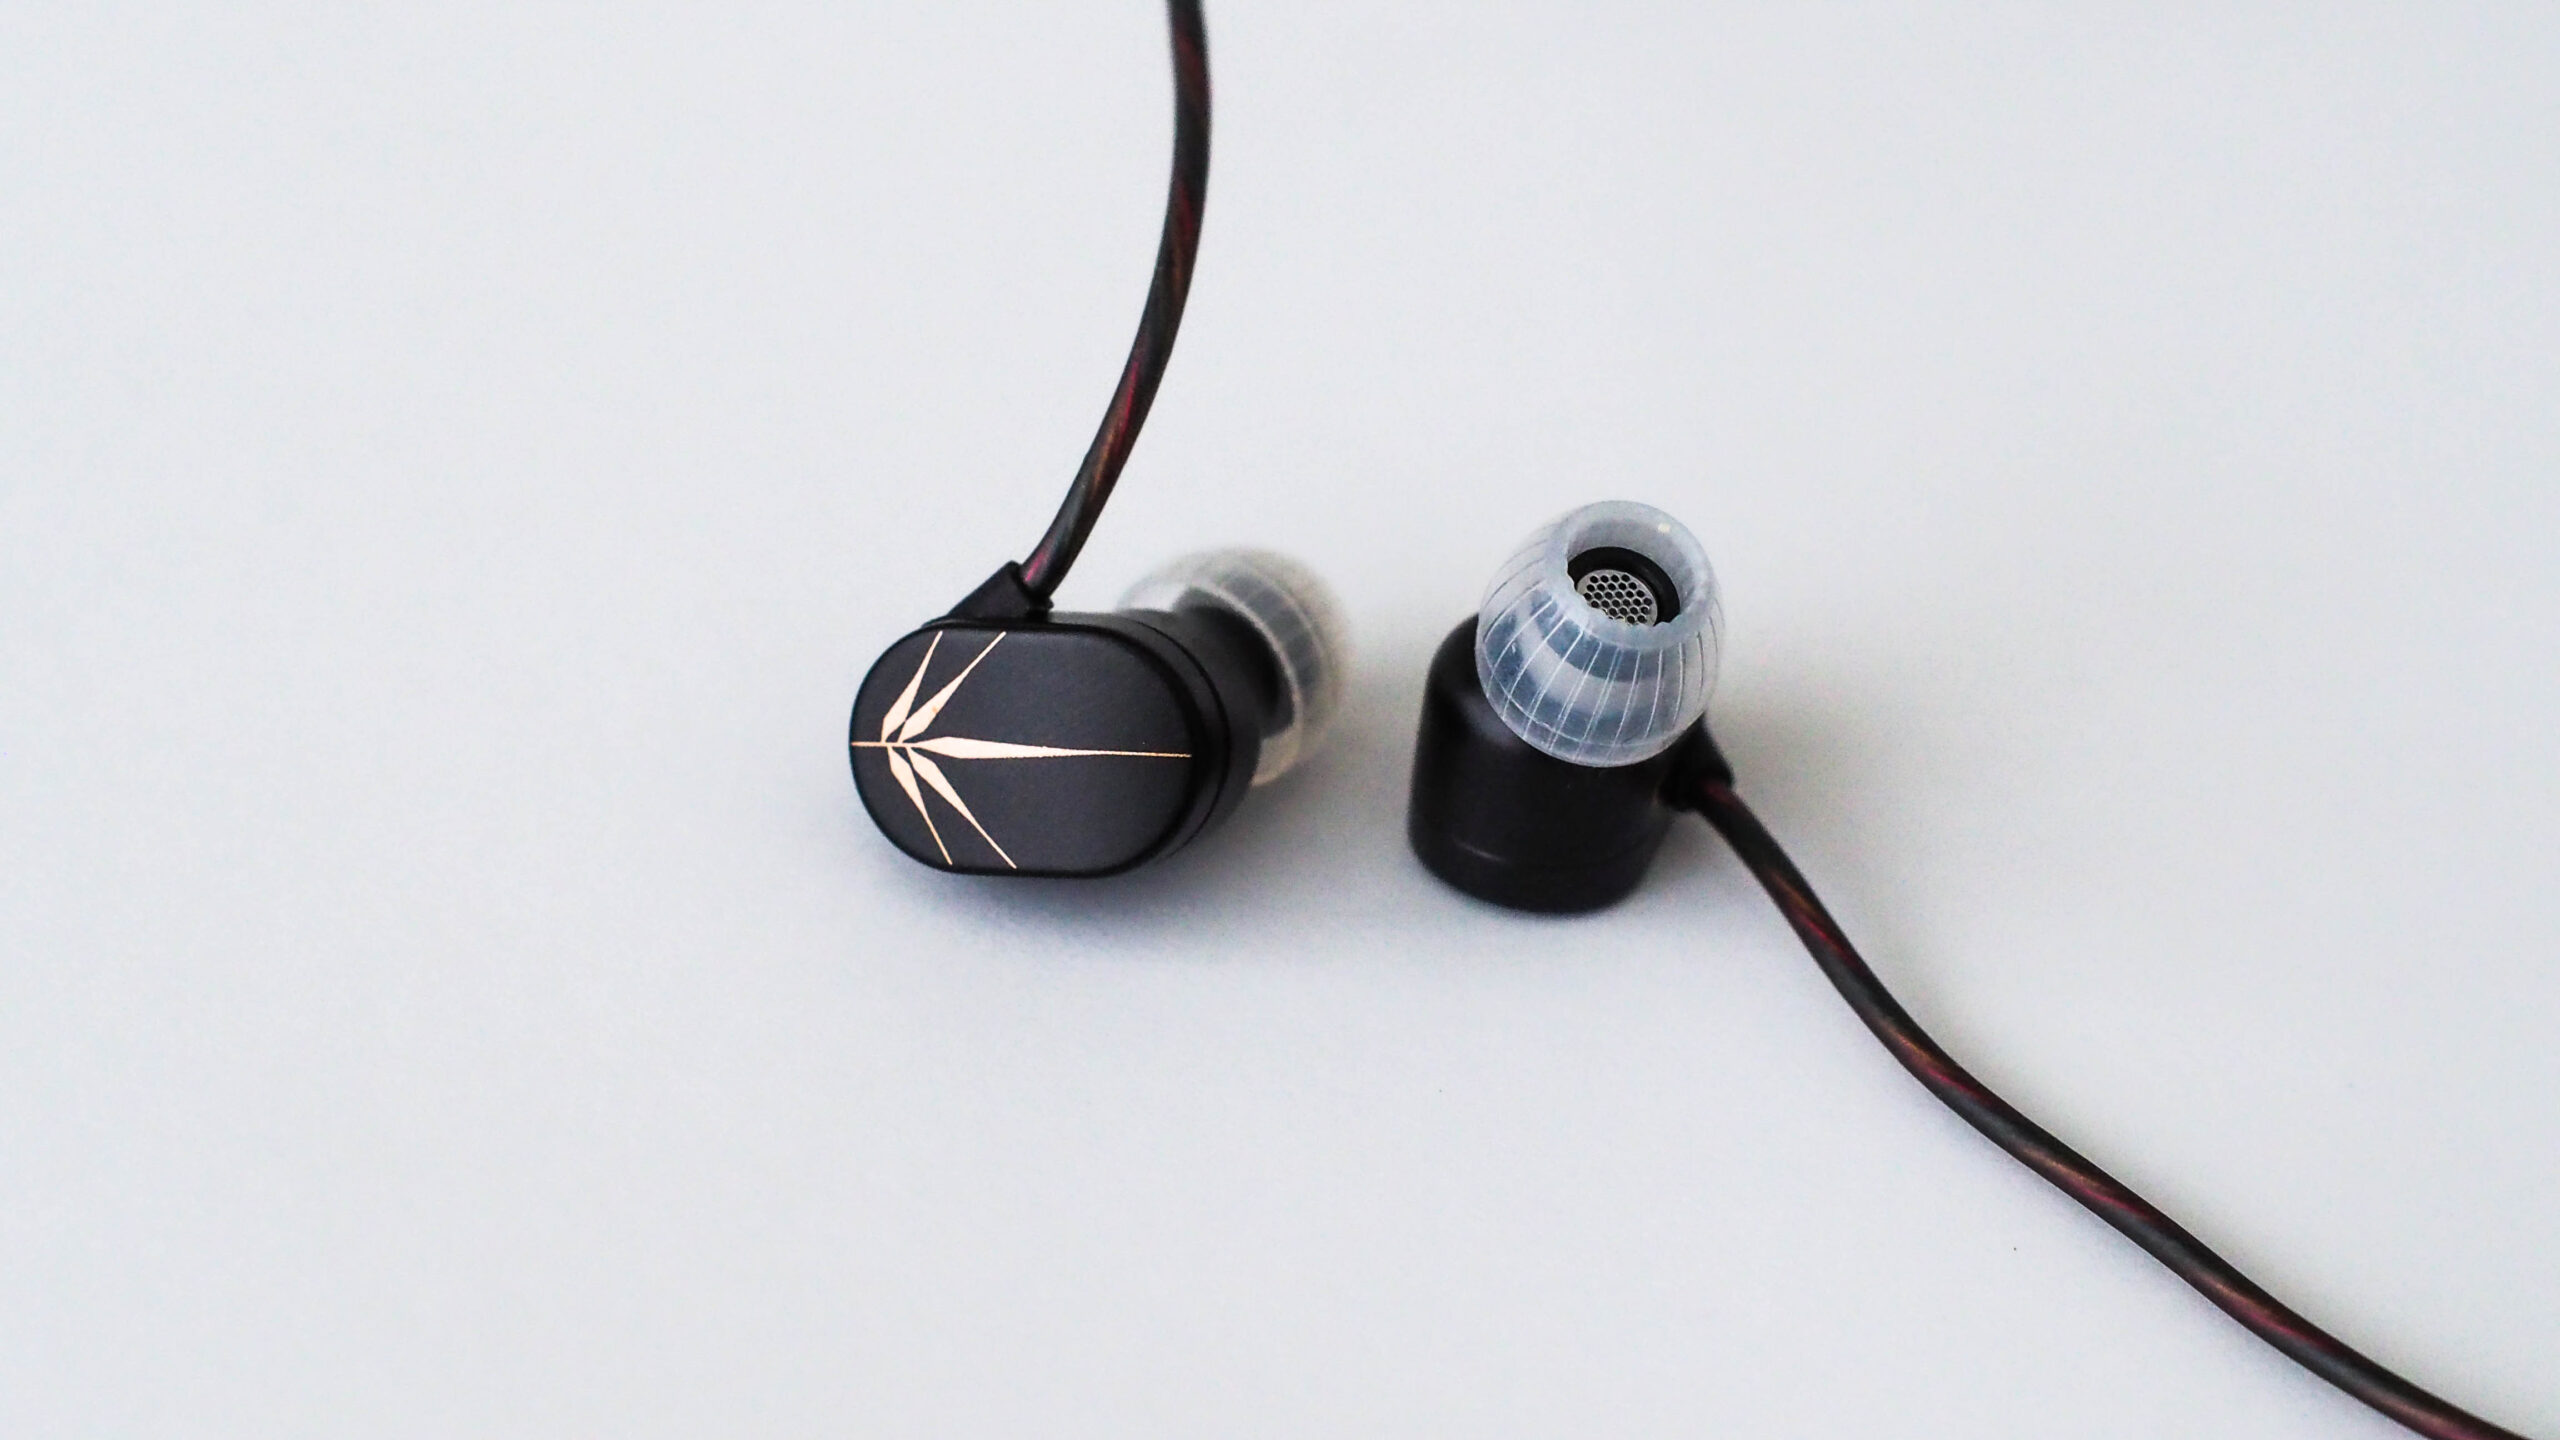 Moondrop Chu - Reviews  Headphone Reviews and Discussion 